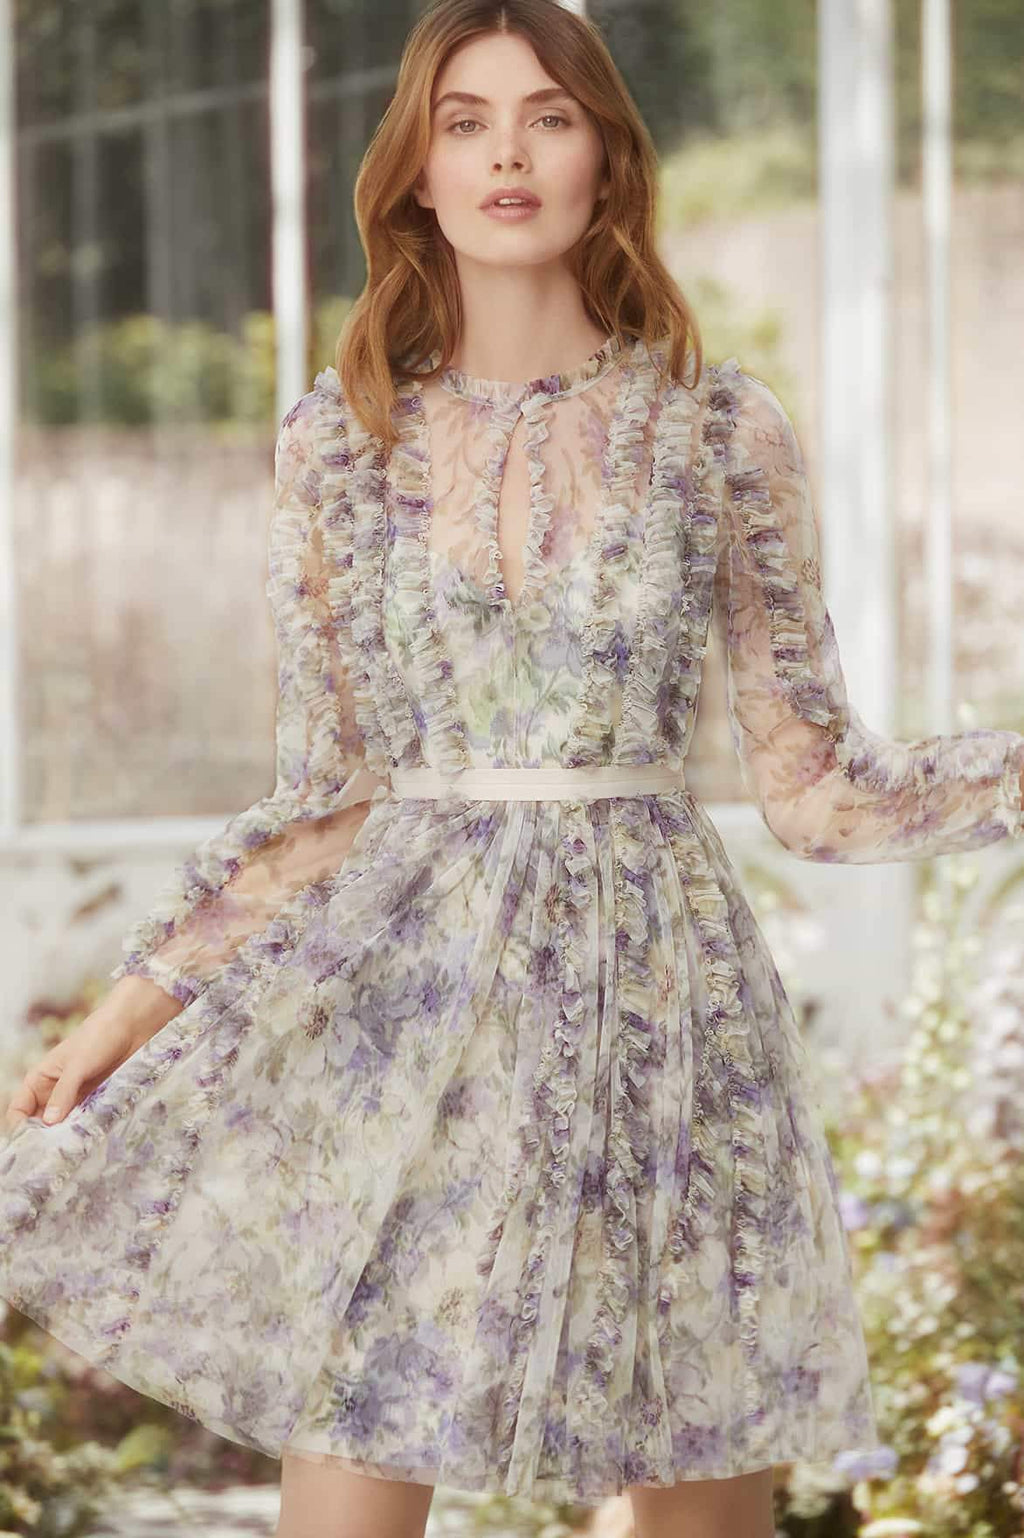 PS20 New Season Lilacs Garland Dress in Champagne.